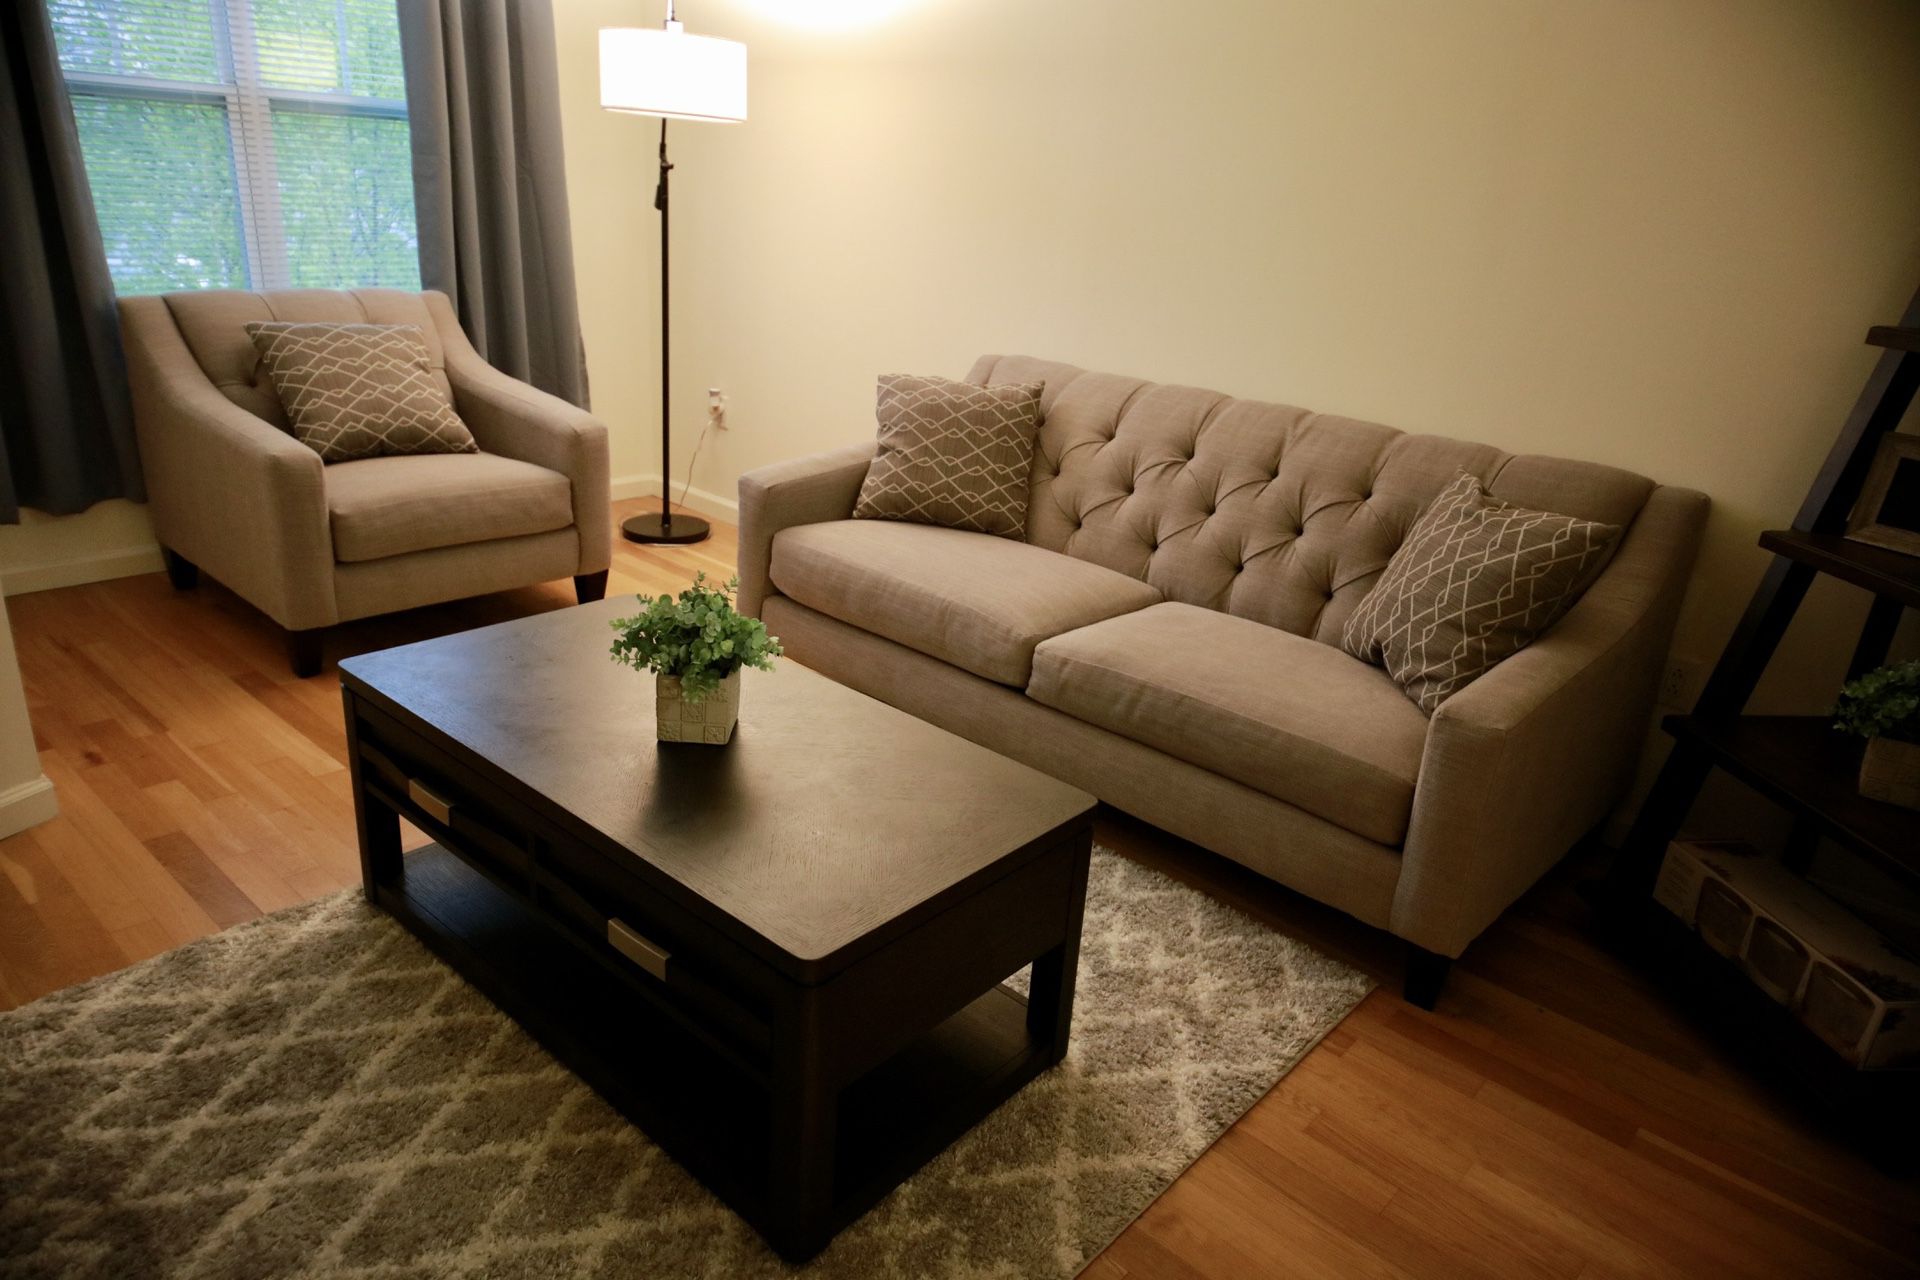 Couch, Accent Chair And Coffee Table For Sale! 